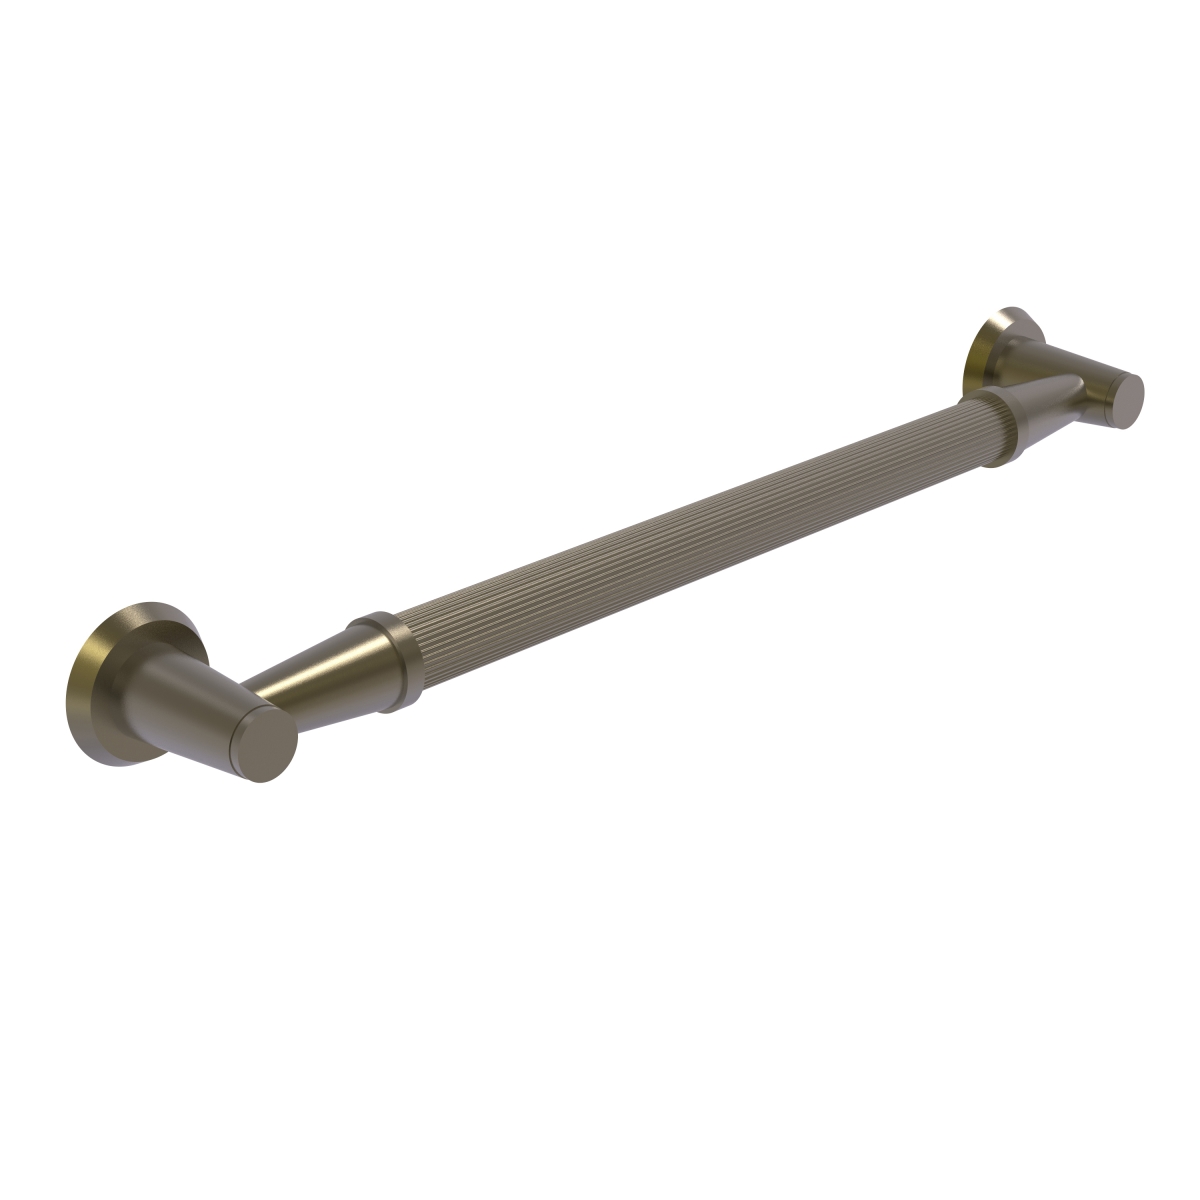 Picture of Allied Brass MD-GRR-16-ABR 16 in. Reeded Grab Bar, Antique Brass - 3.5 x 18 x 16 in.